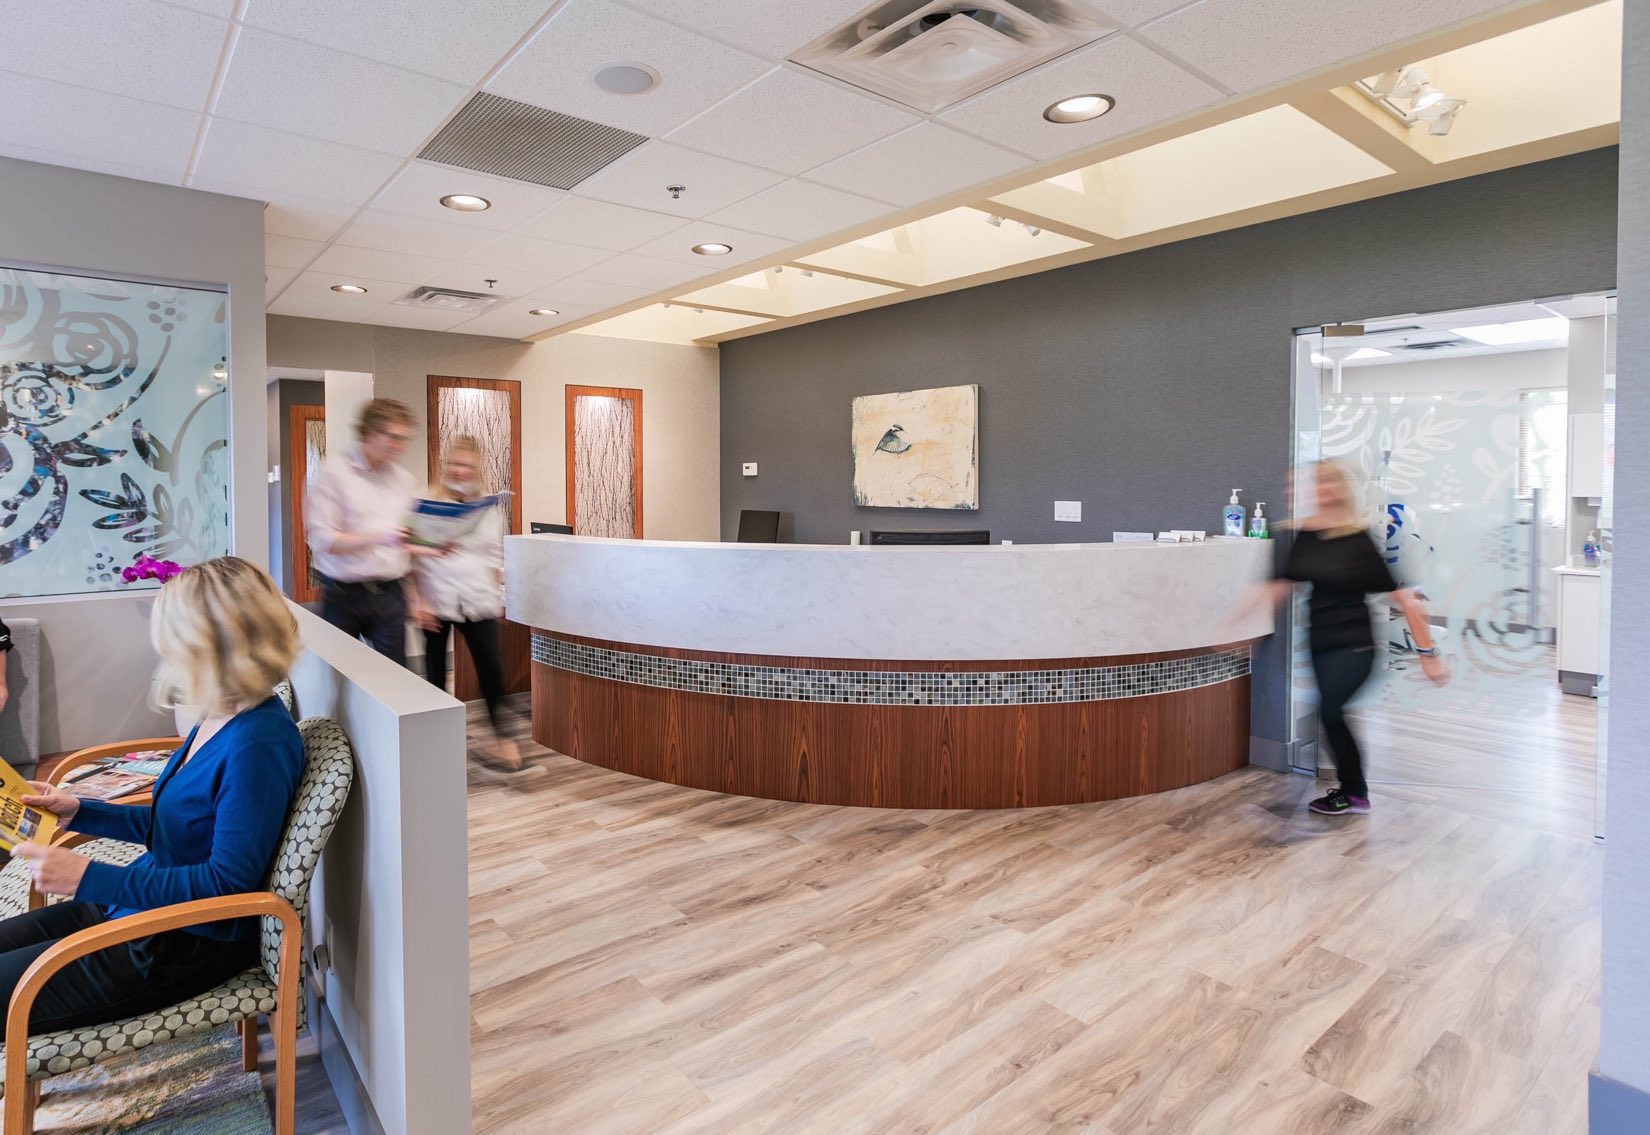 Rosemary Heights Dental Implant Centre in South Surrey, BC